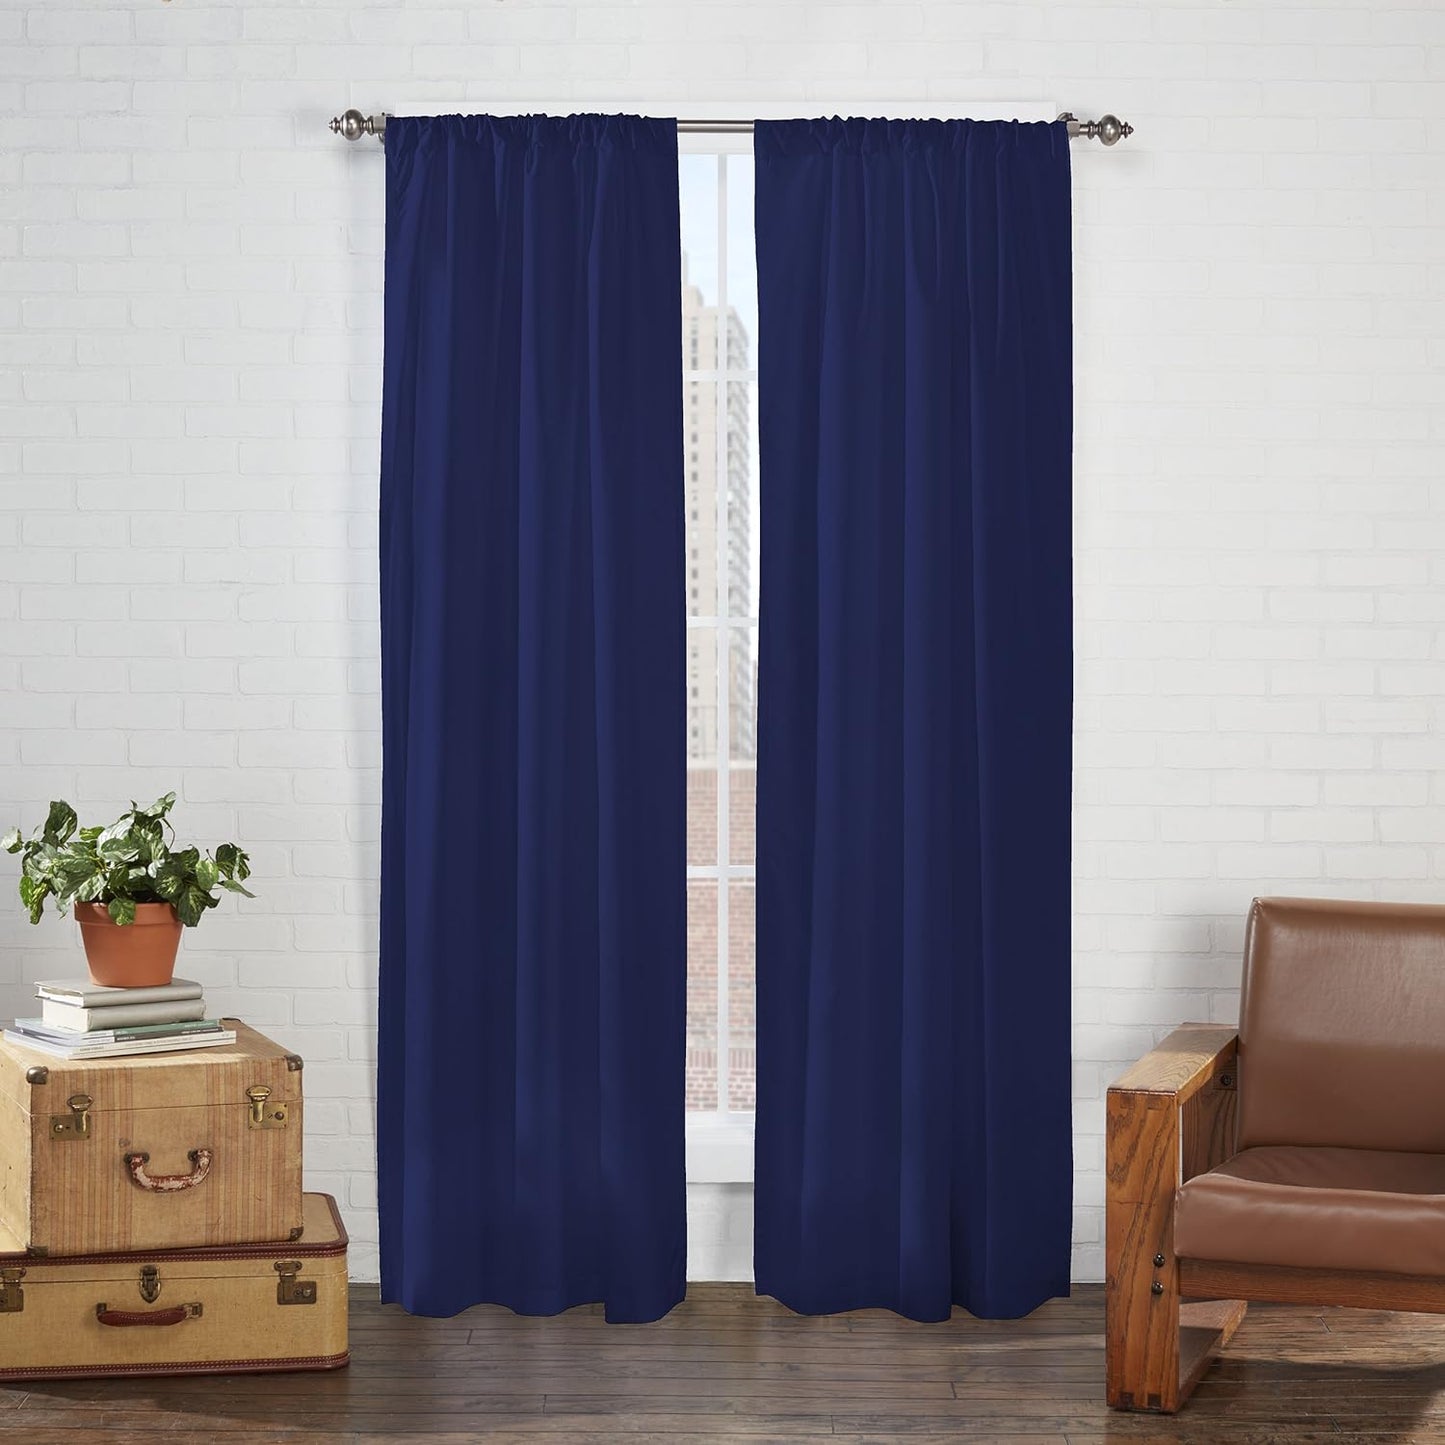 Pairs to Go Cadenza Modern Decorative Rod Pocket Window Curtains for Living Room (2 Panels), 40 in X 84 In, Teal  Keeco LLC Navy 40 In X 54 In 